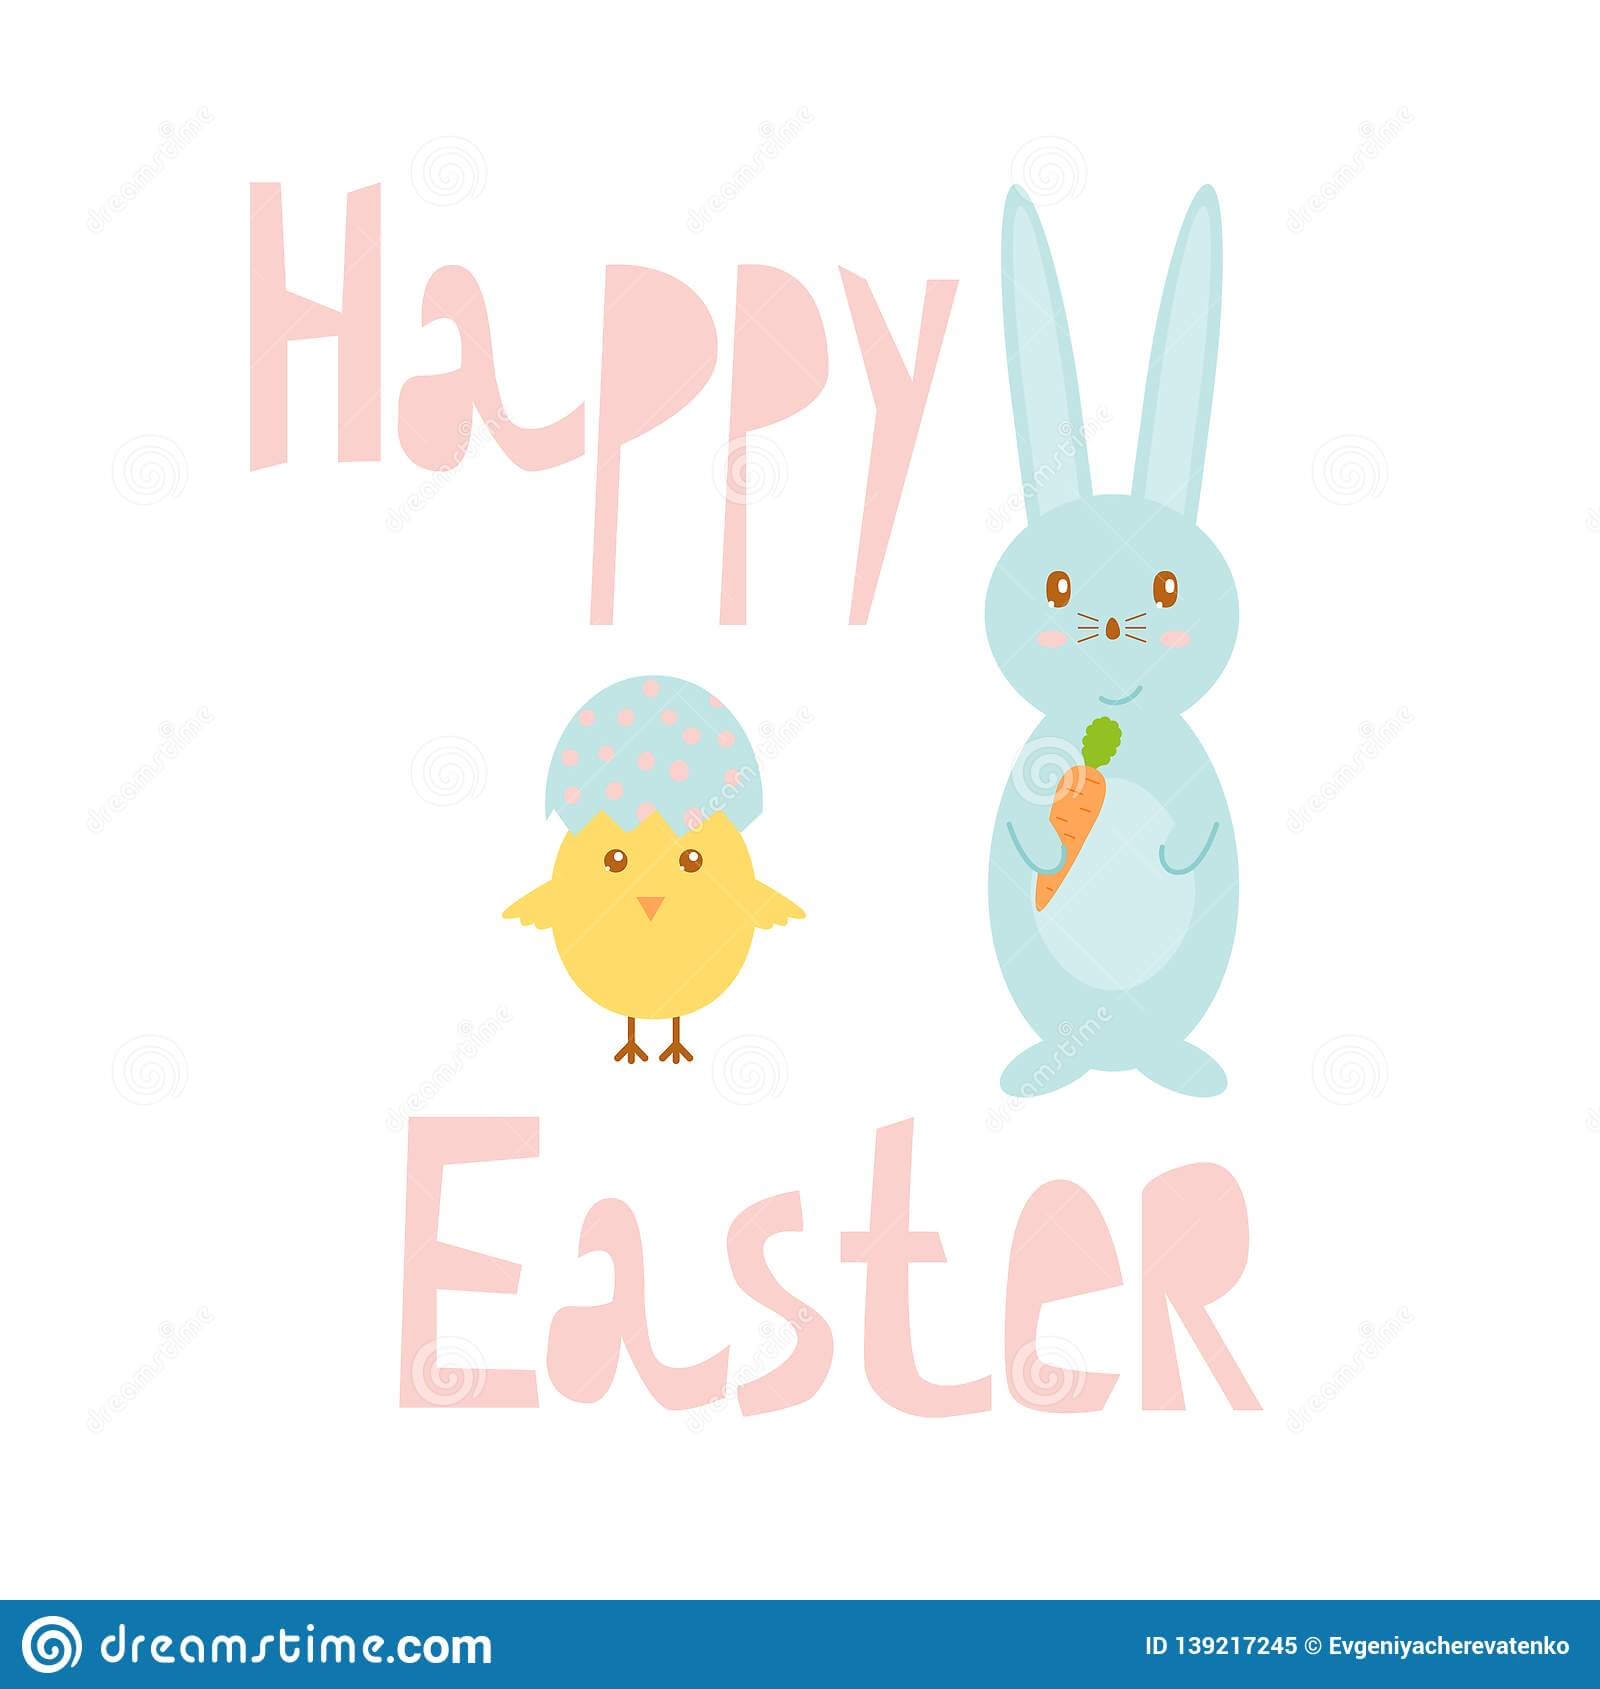 Happy Easter Greeting Card Template With Bunny And Chick Pertaining To Easter Chick Card Template